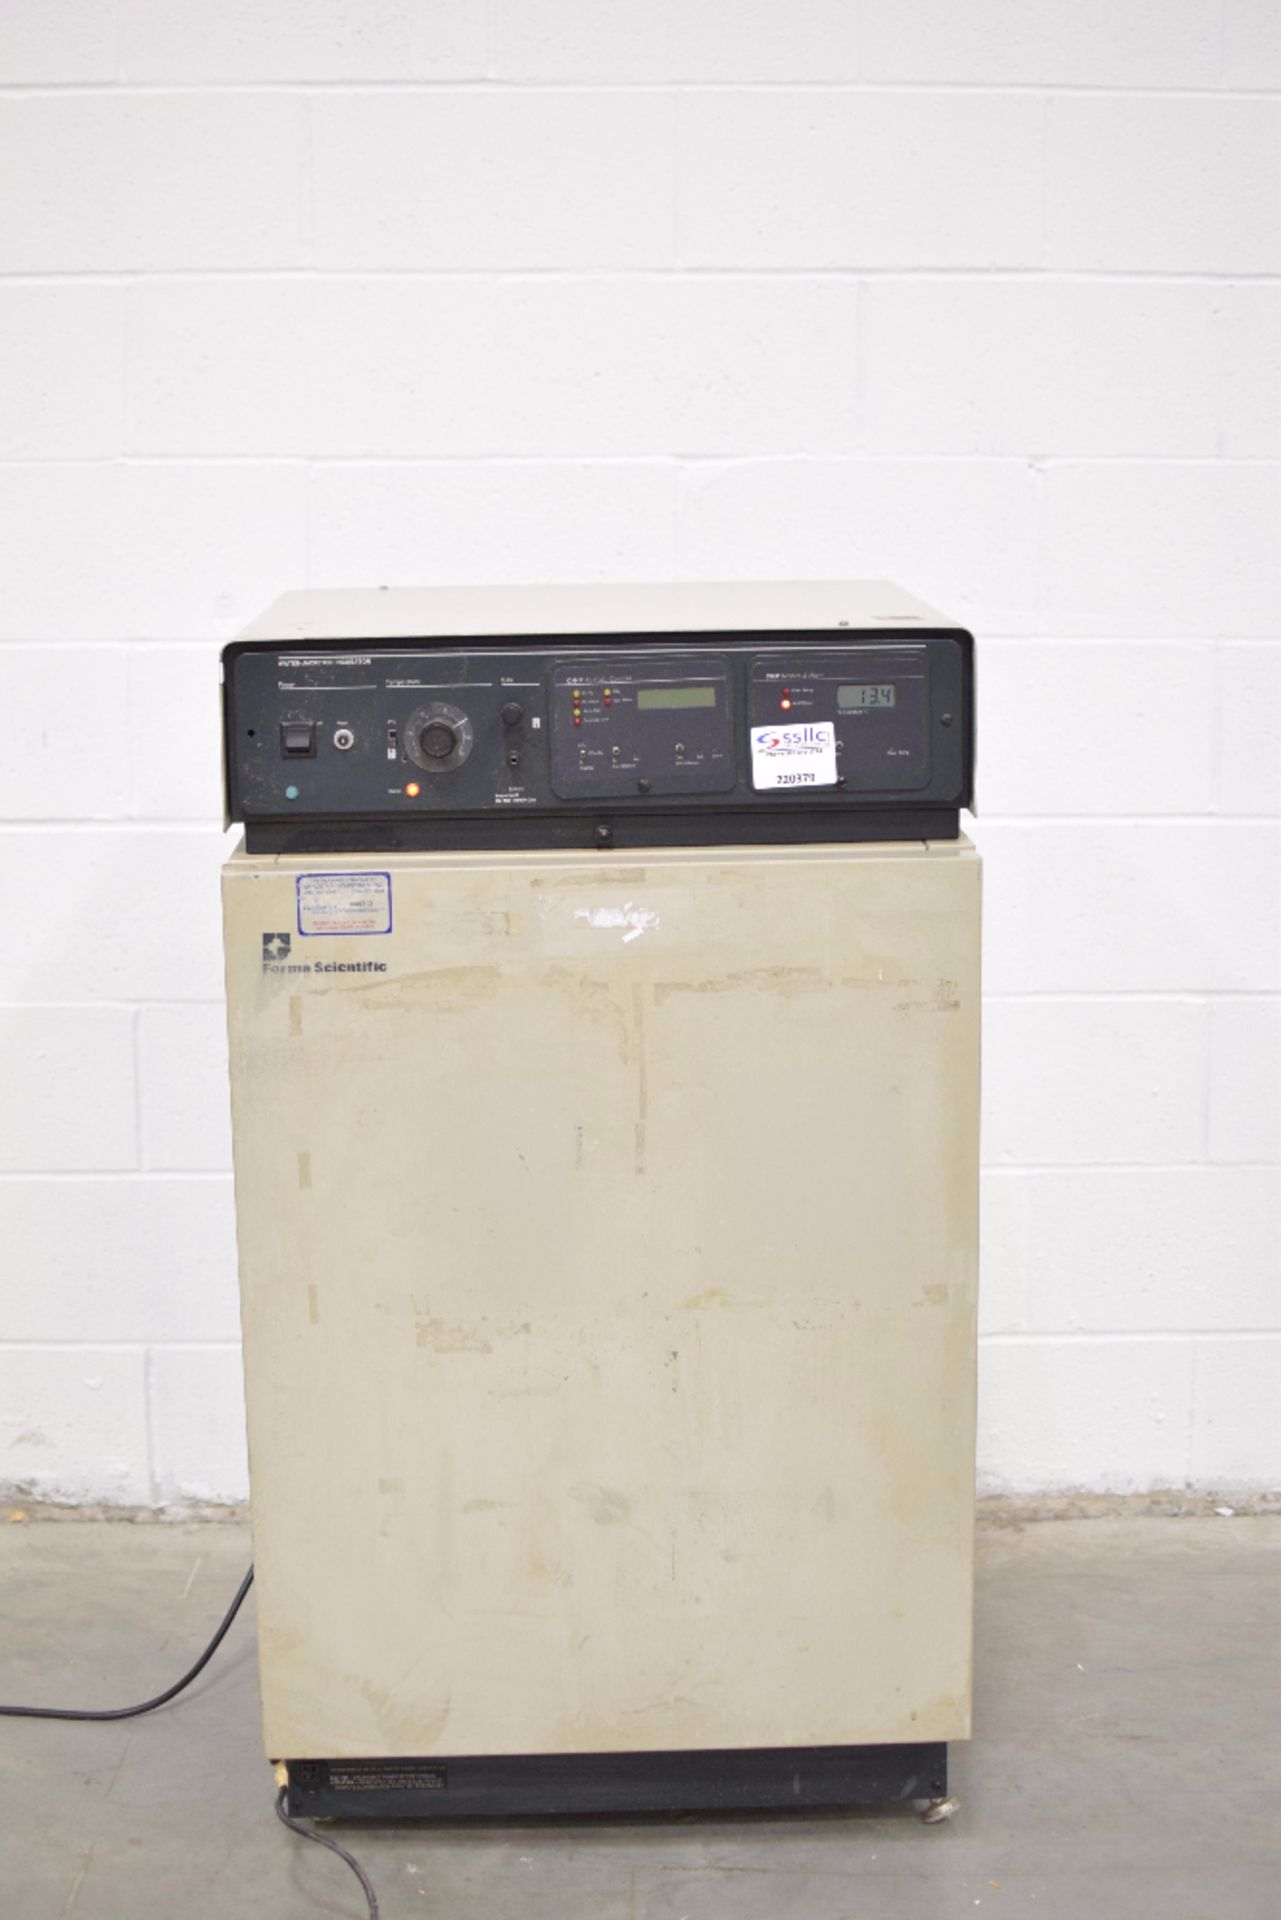 Forma Scientific Model 3159 Water Jacketed Incubator